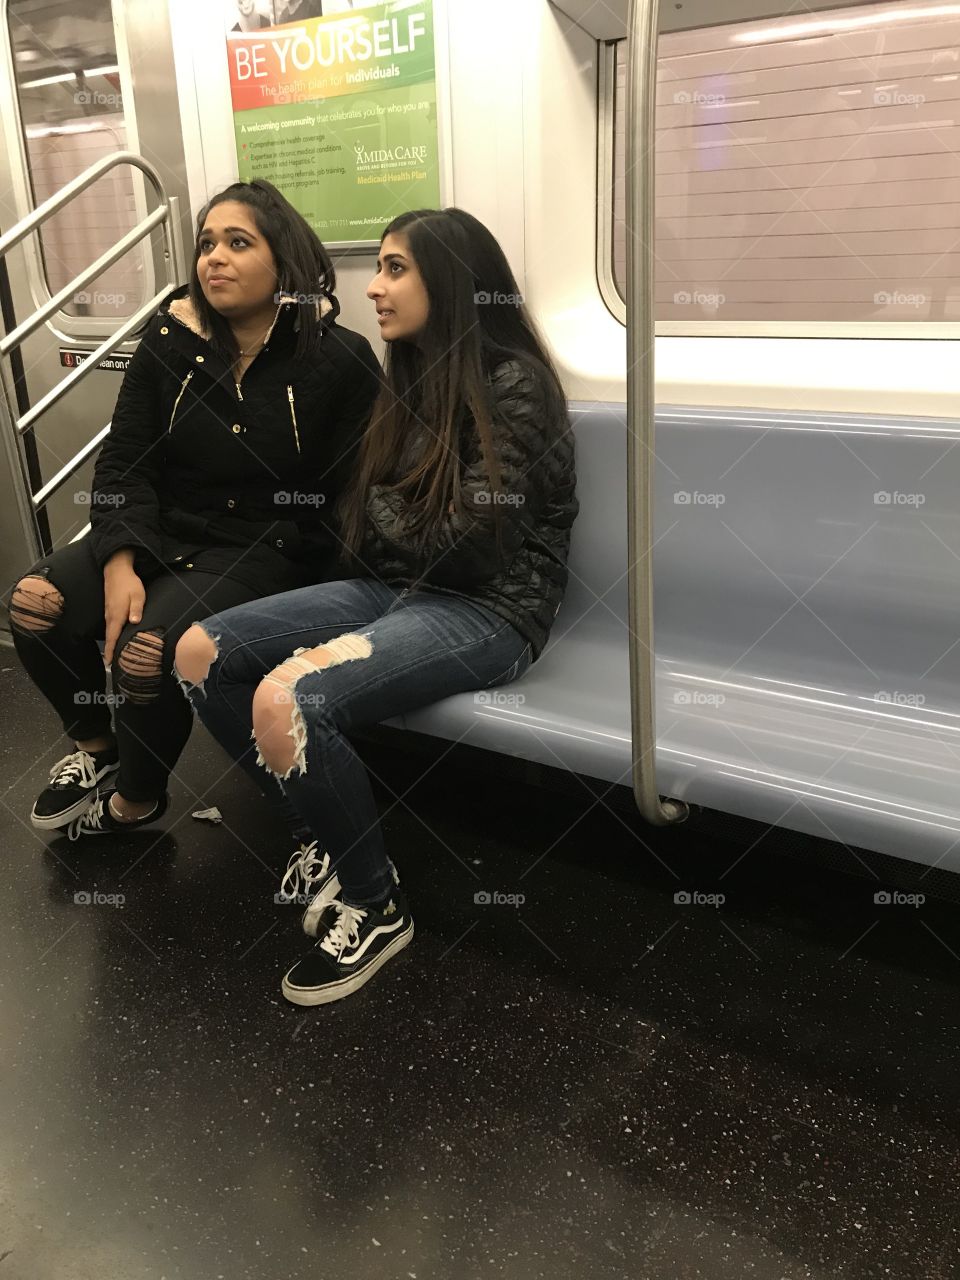 Two young women attempt to be kind to a homeless fellow on the downtown No. 2 local train near 23rd street, about 2:42 AM.